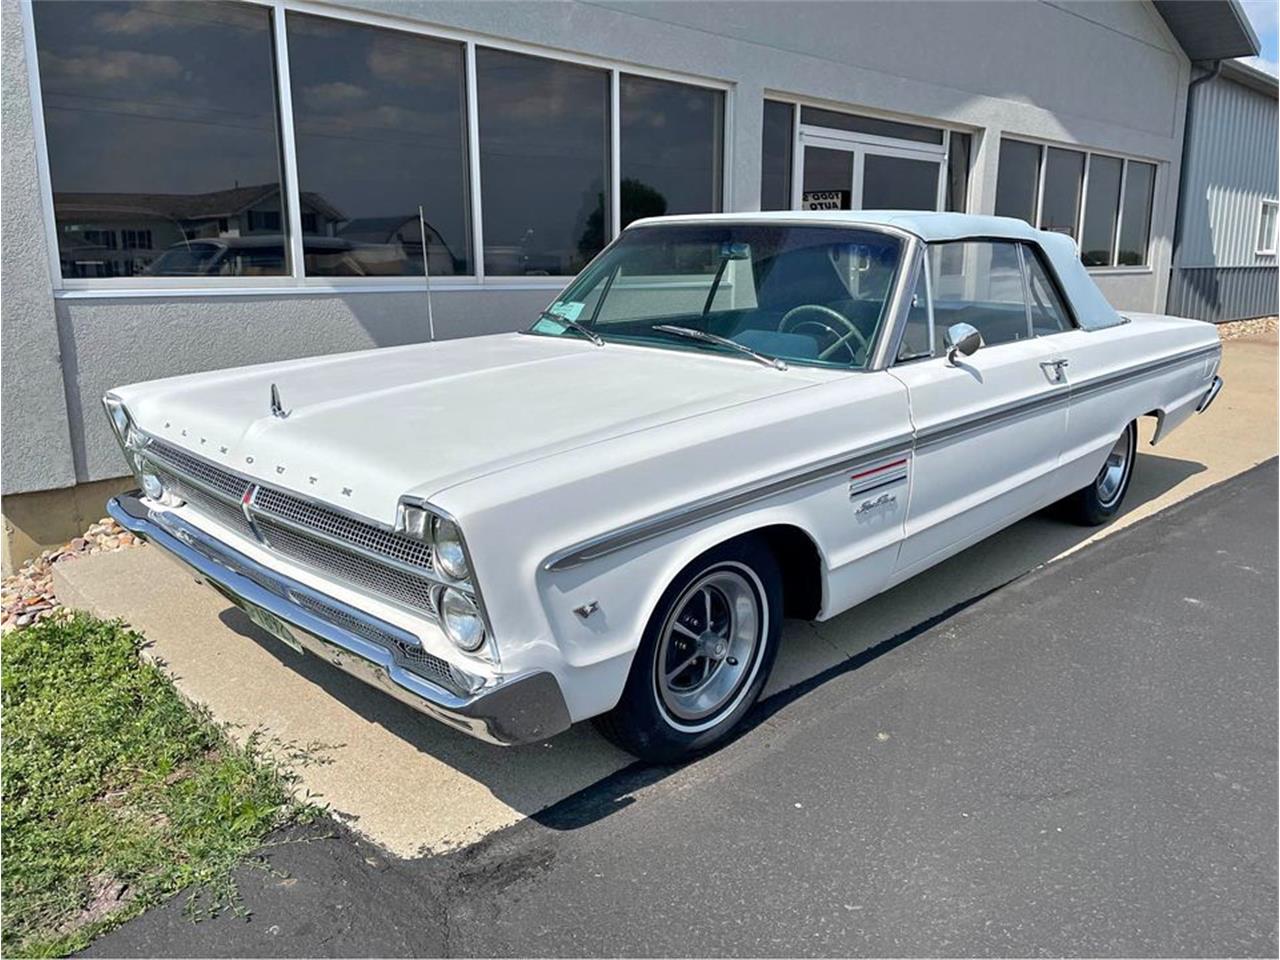 For Sale at Auction: 1965 Plymouth Fury in Sioux Falls, South Dakota